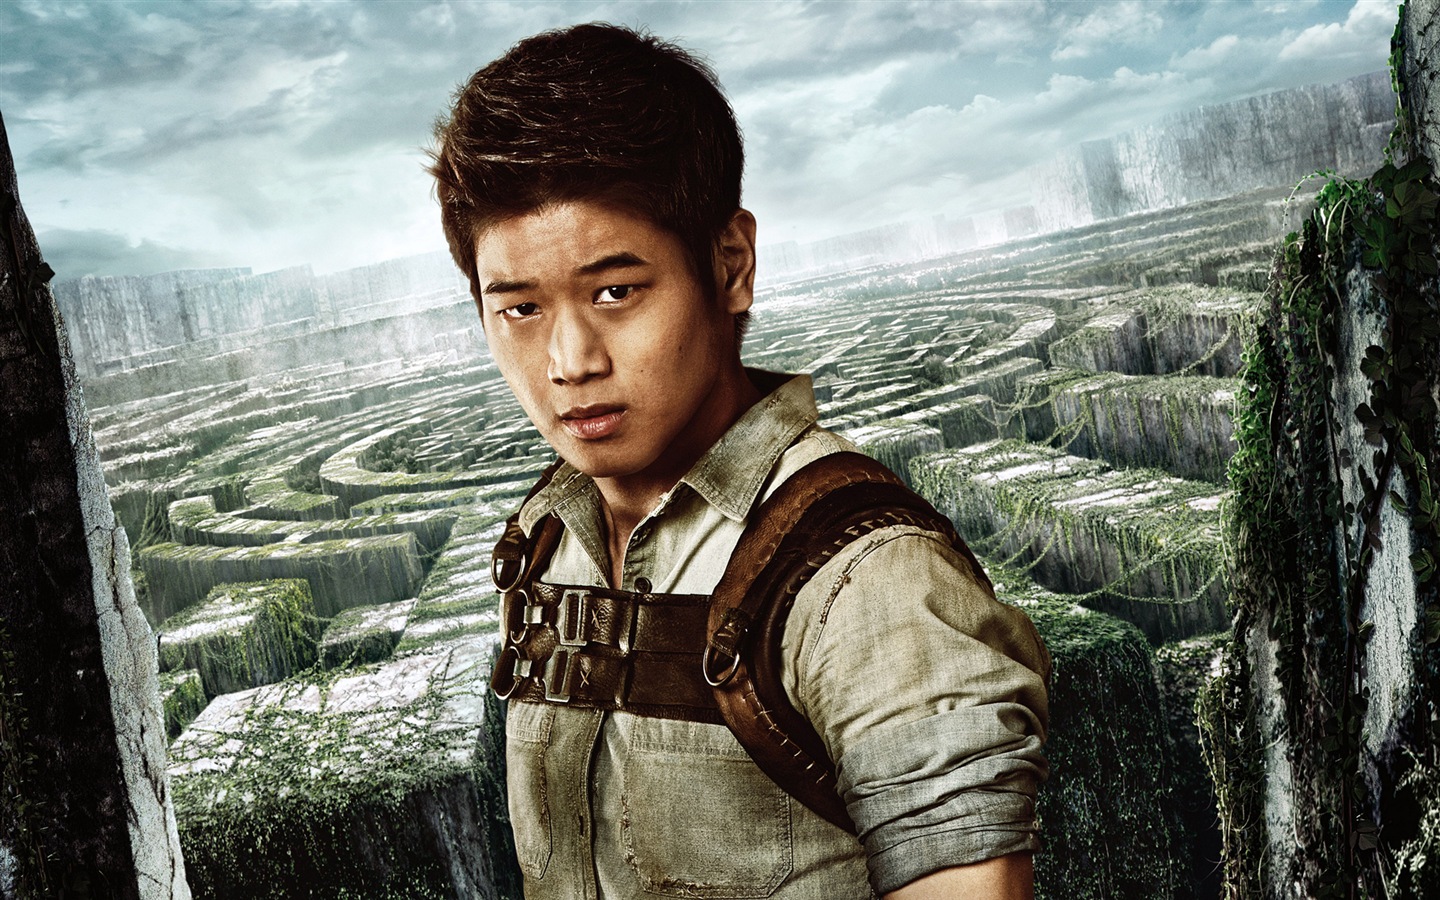 The Maze Runner HD movie wallpapers #10 - 1440x900